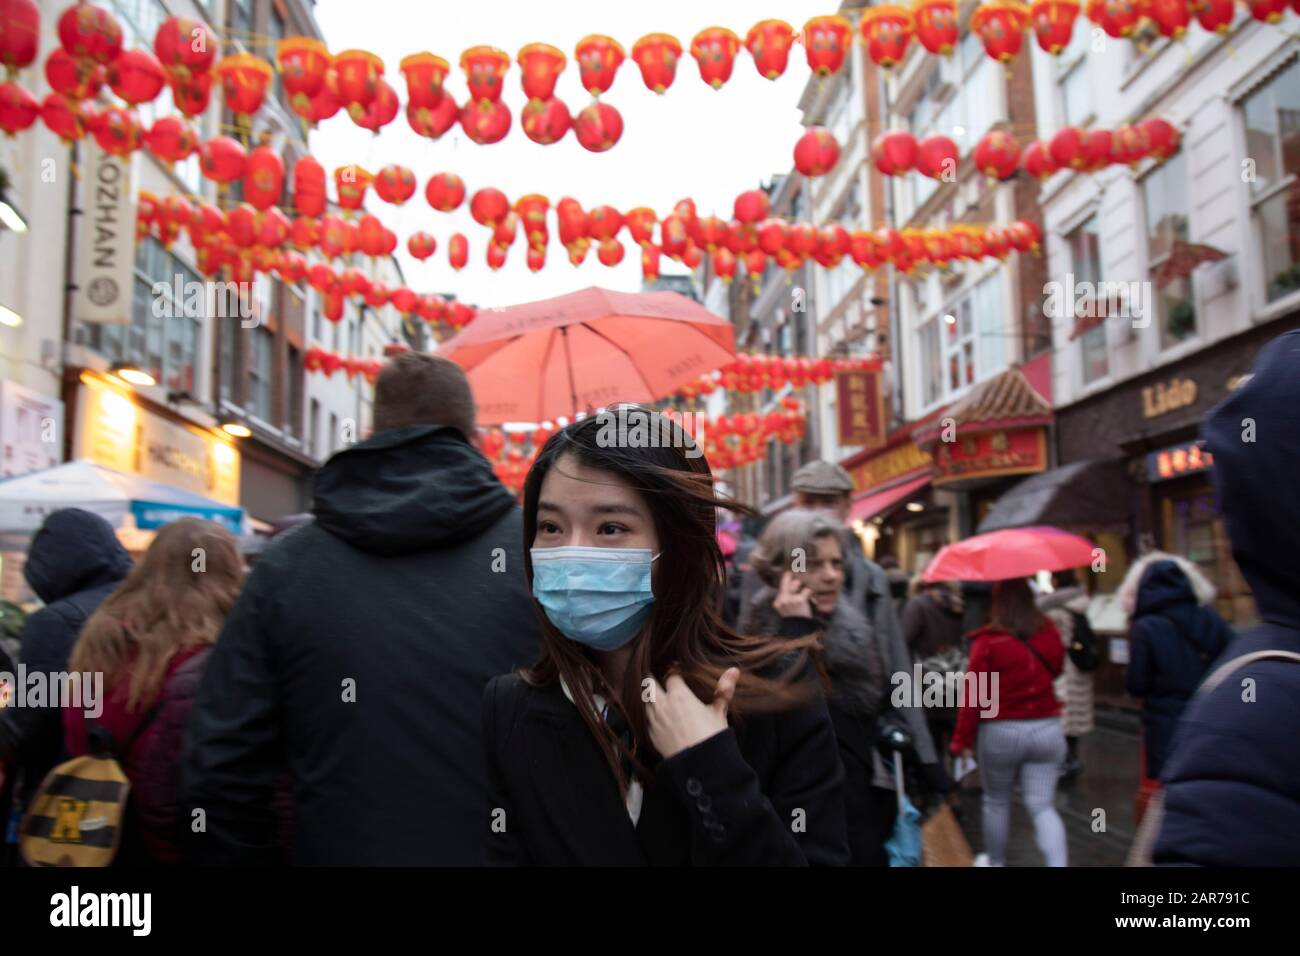 People wearing face masks for Chinese new year celebrations on Gerrard Street in Chinatown on 26th January 2020 in London, England, United Kingdom. Due to the recent coronavirus outbreak an increased number of Chinese / Asian and western people are wearing face masks in public despite NHS Englands advice that the risk of getting the illness in the UK is low. Wuhan novel coronavirus WN-CoV is a new respiratory illness that has not previously been seen in humans. Each year local Chinese community and Londoners gather on this famous area of central London which is the focus of celebrations for th Stock Photo